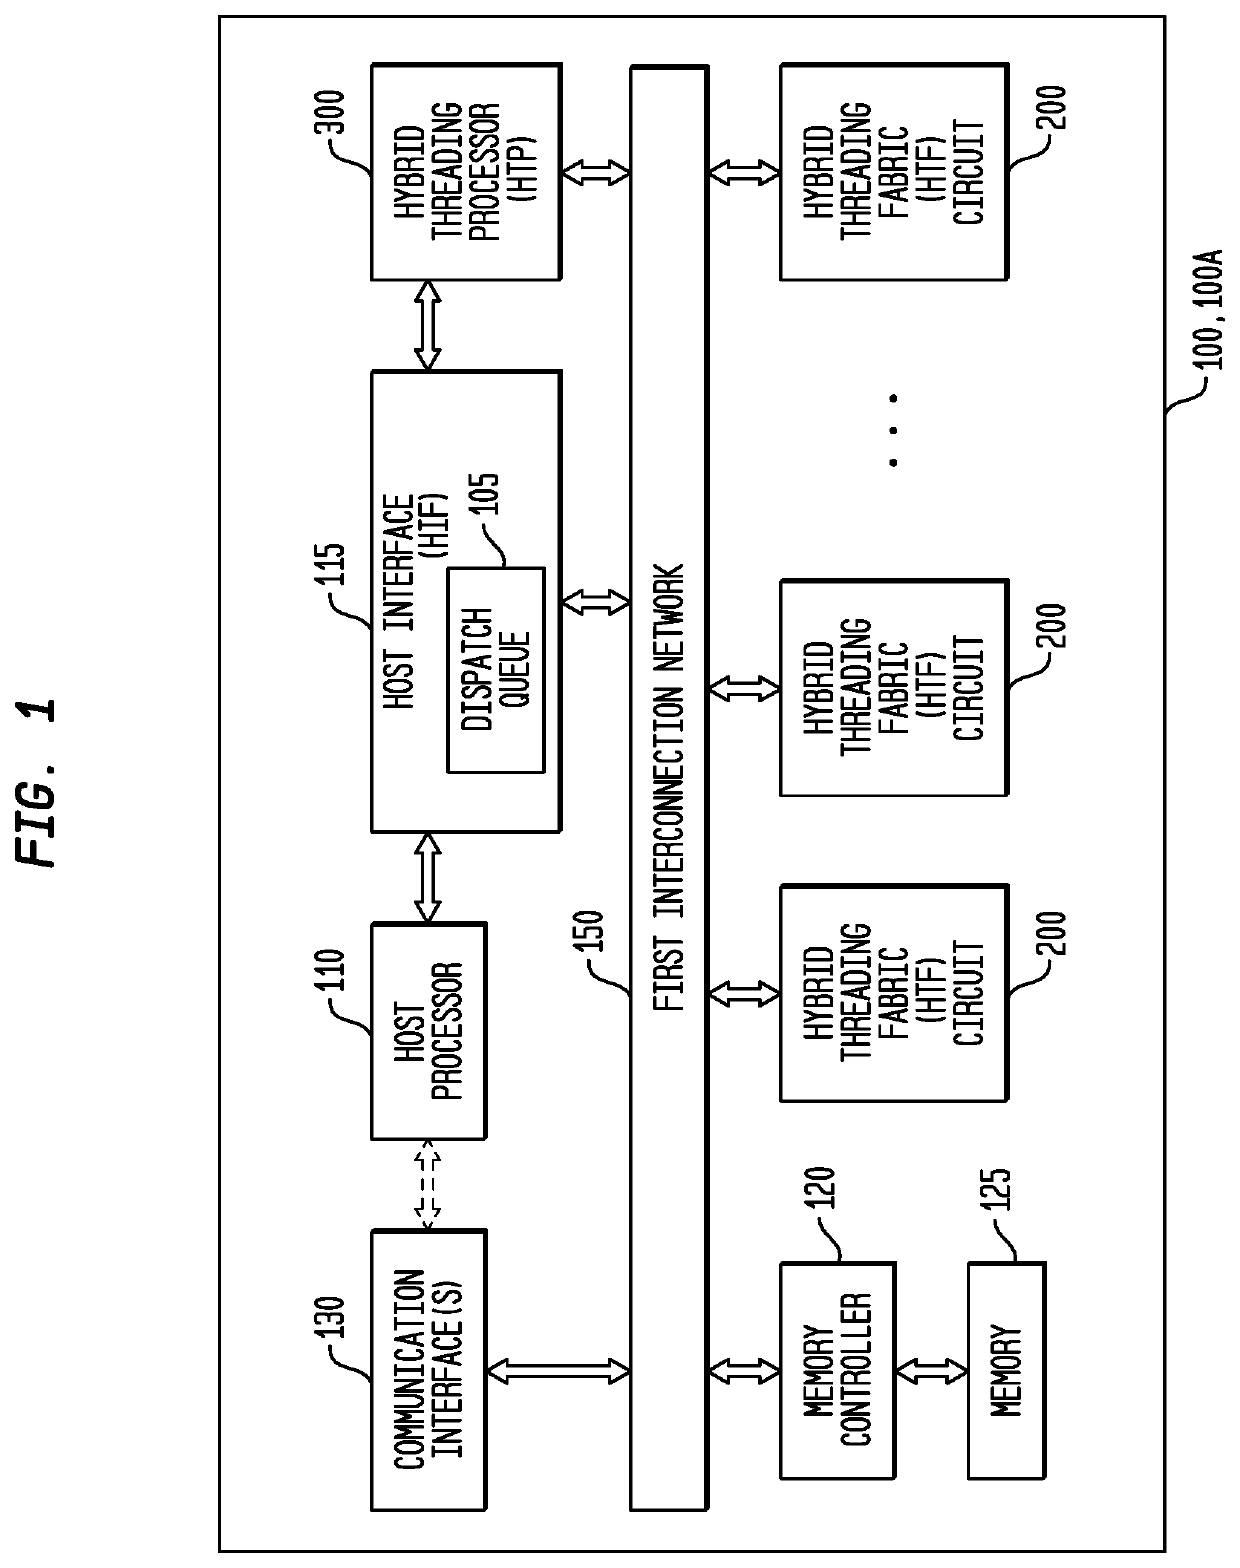 Memory Interface for a Multi-Threaded, Self-Scheduling Reconfigurable Computing Fabric